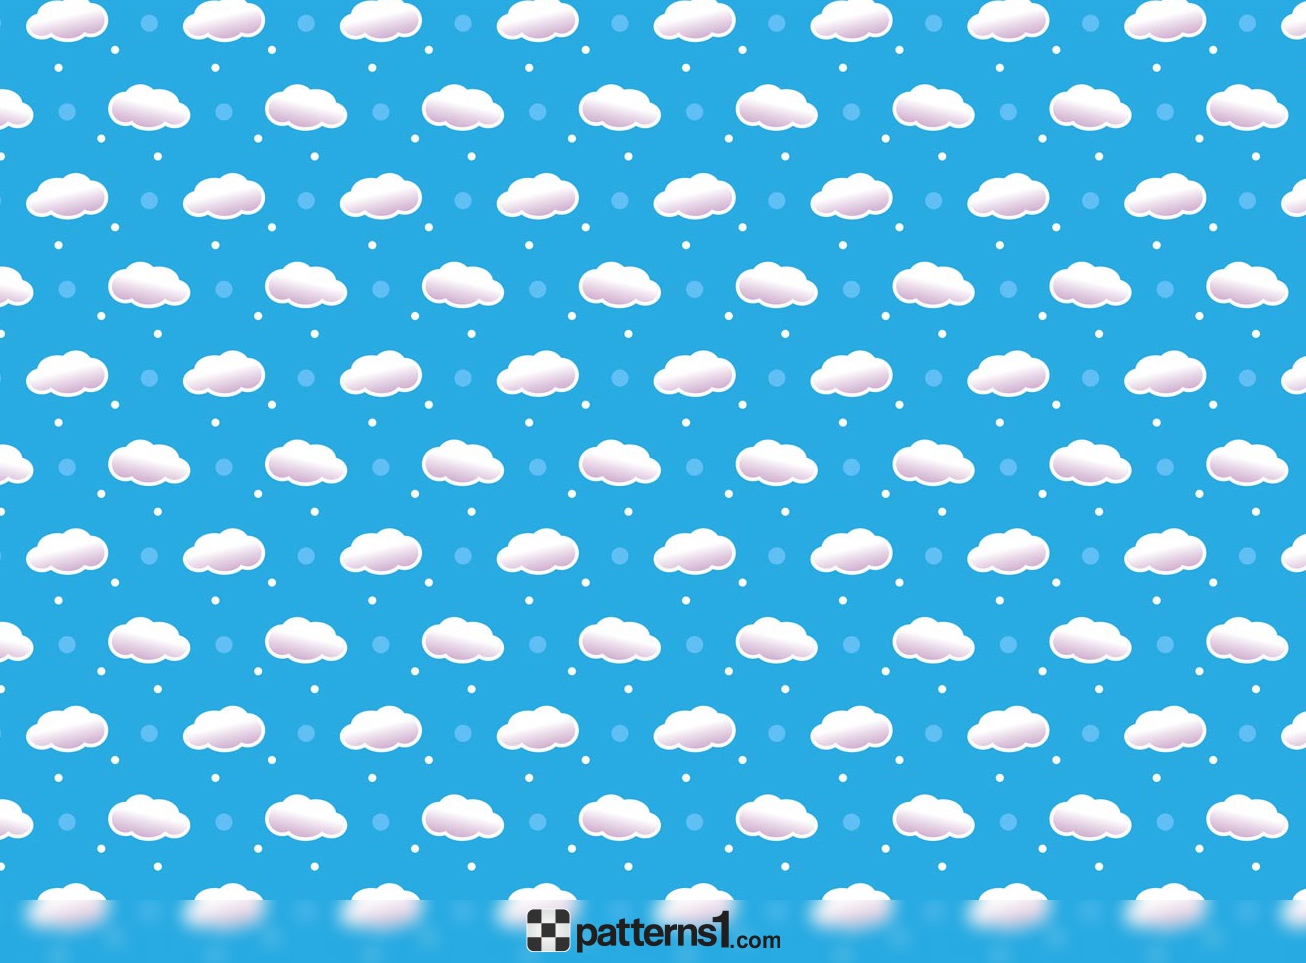 White Clouds Clipart Patterns on Blue Sky.